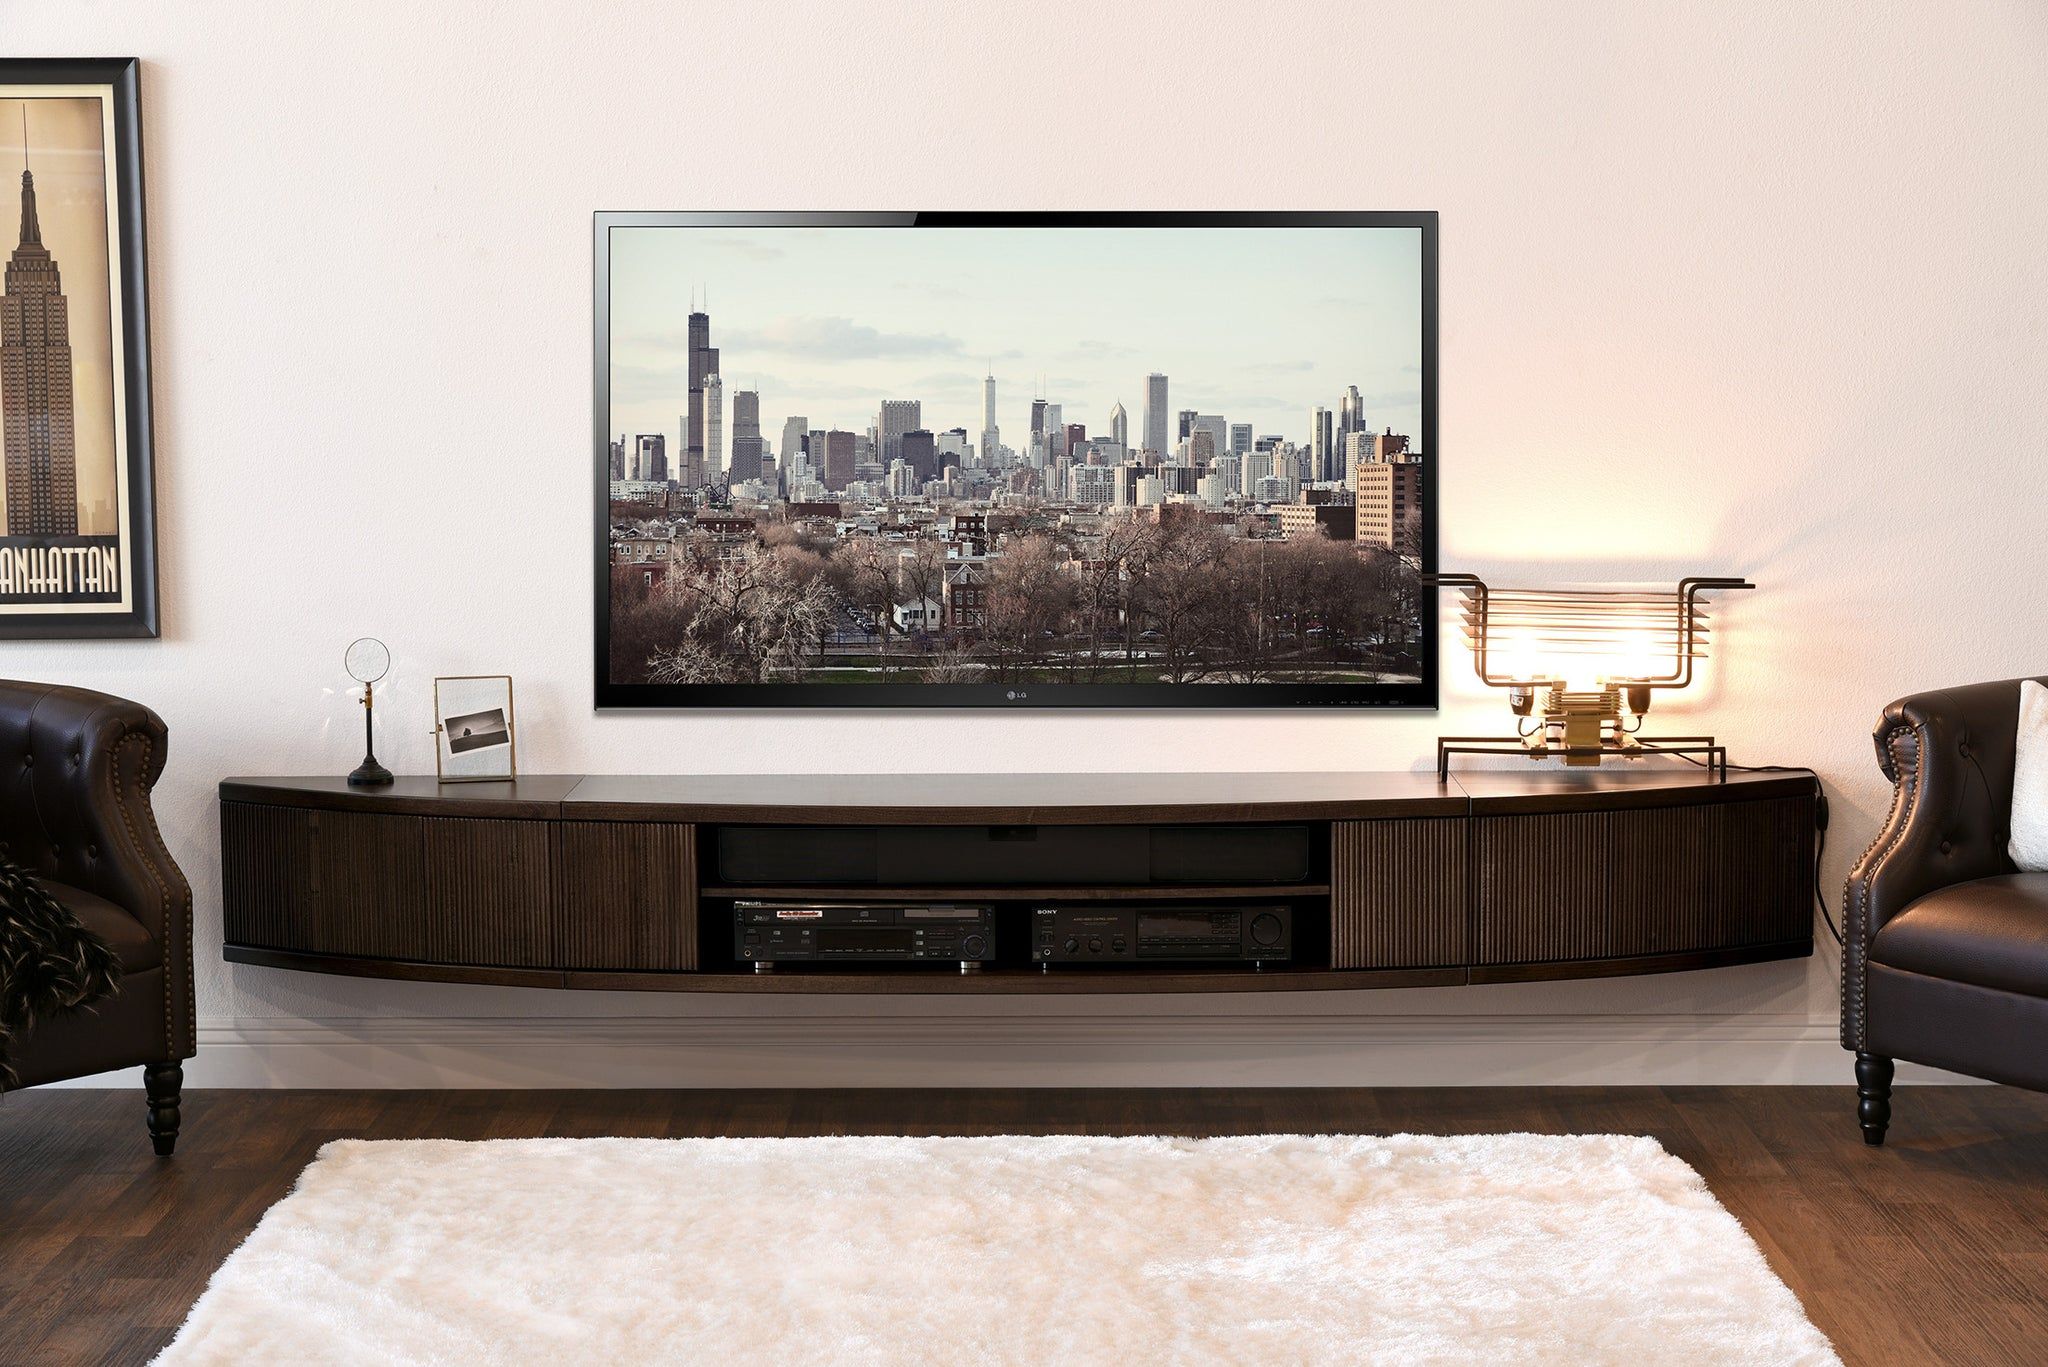 Wall Mount Floating Entertainment Center Tv Stand – Arc – Espresso In Wall Mounted Floating Tv Stands (Gallery 3 of 20)